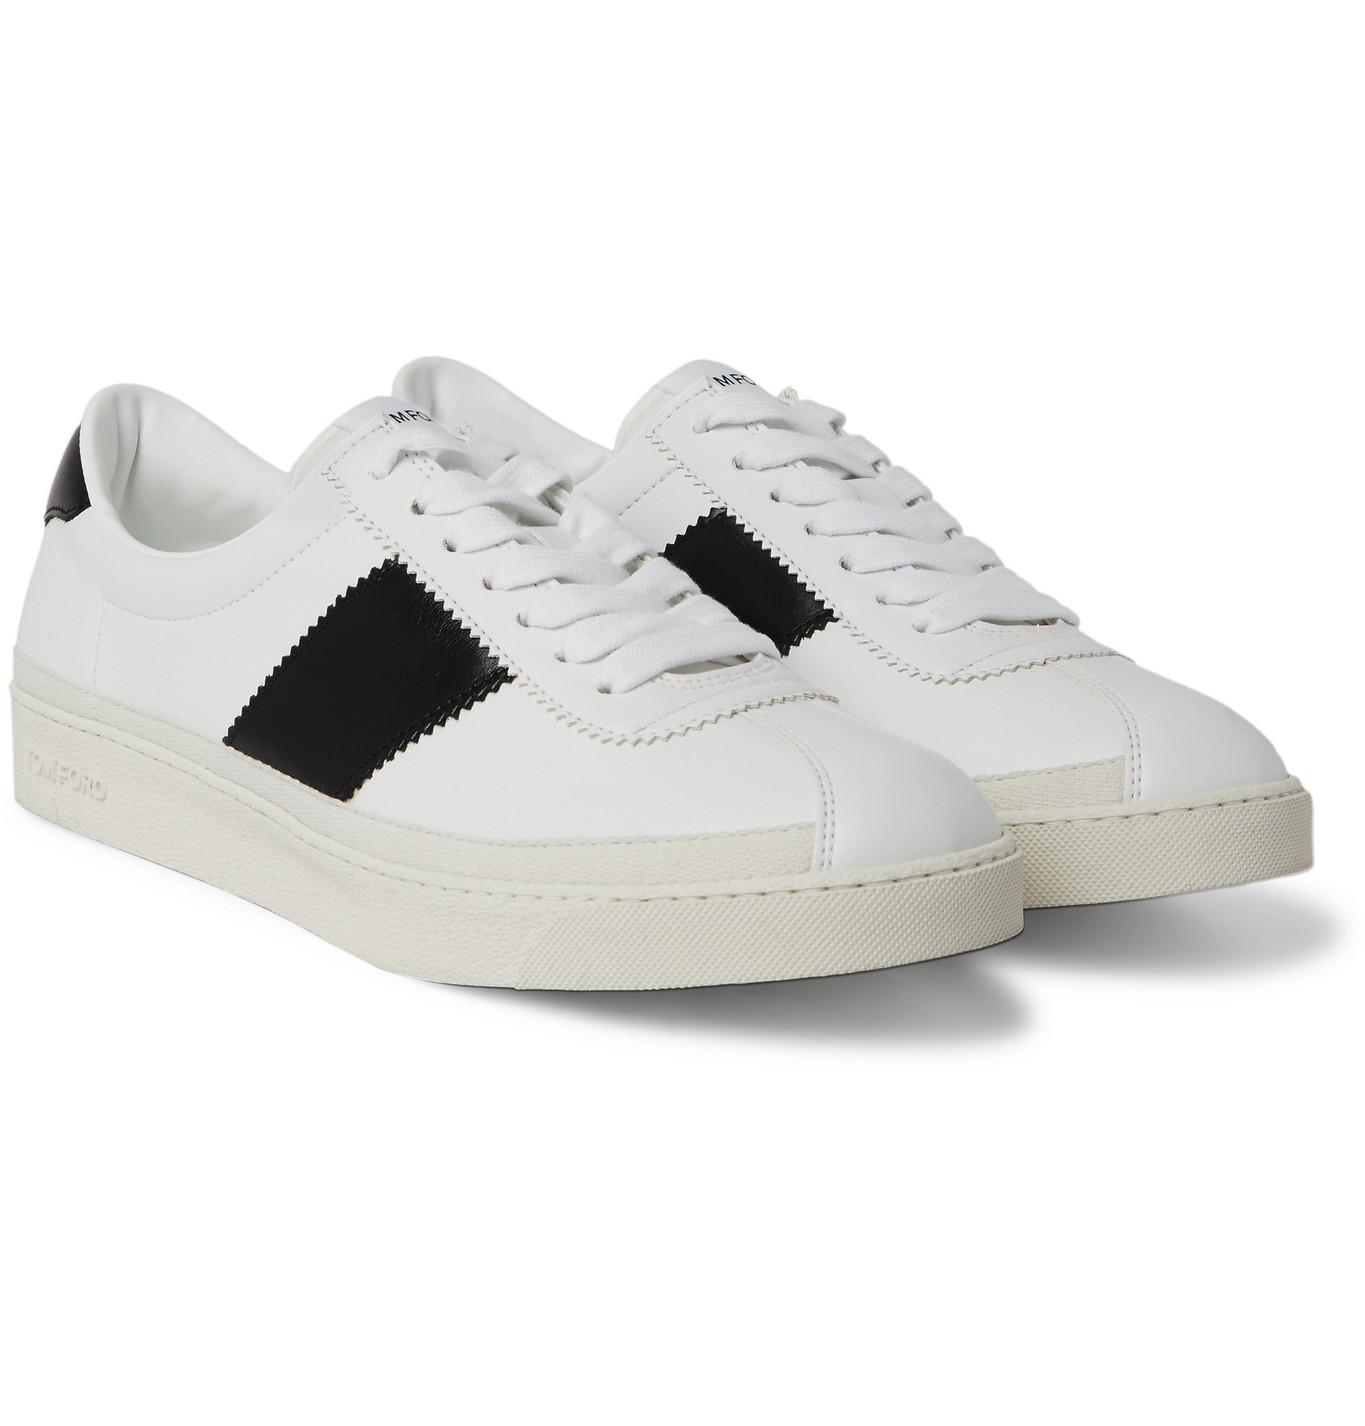 Tom Ford Bannister Leather Sneakers in White for Men - Lyst